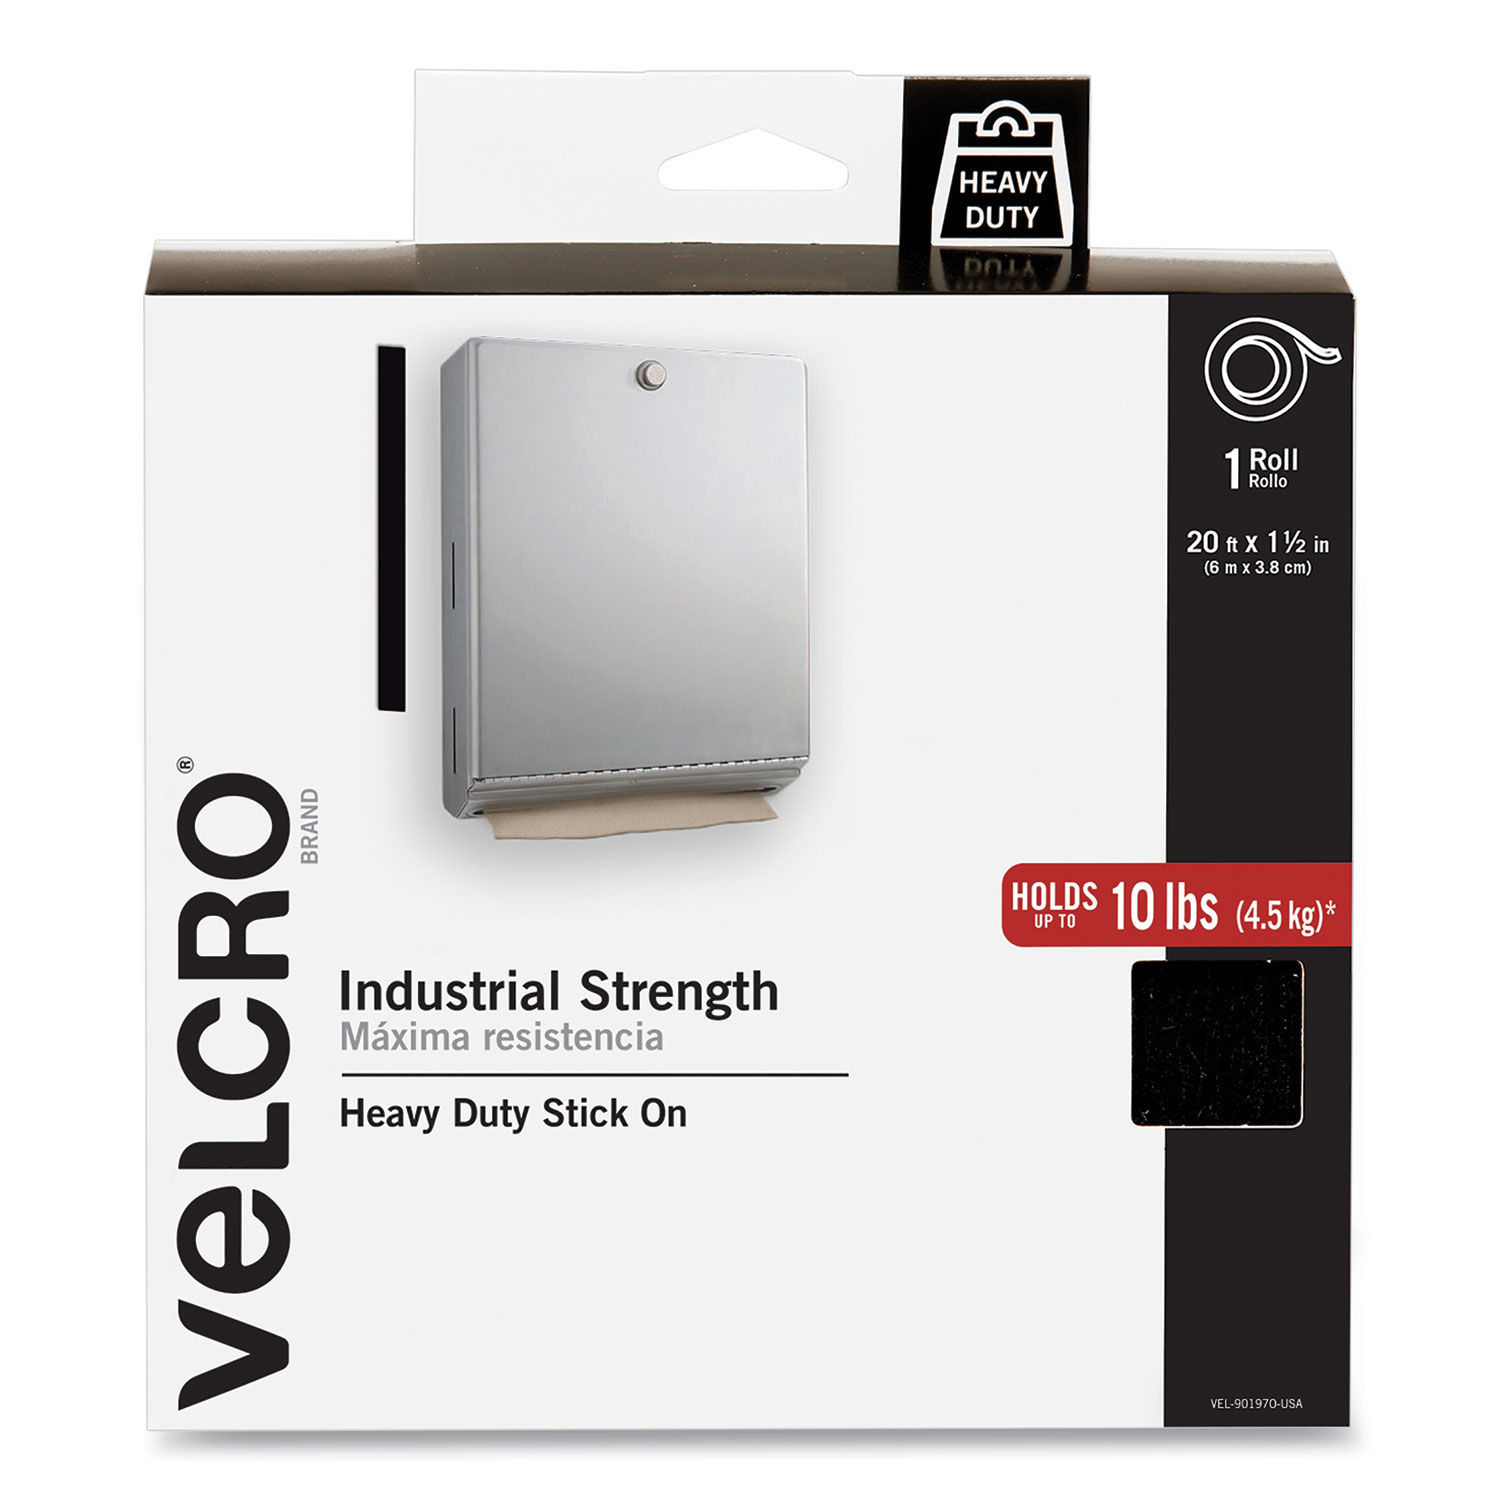 VELCRO Brand Extreme Outdoor Heavy Duty Tape | 4Ft x 1 In | Holds 15 lbs |  Titanium, Industrial Strength Adhesive Backed Hook and Loop Fasteners Roll